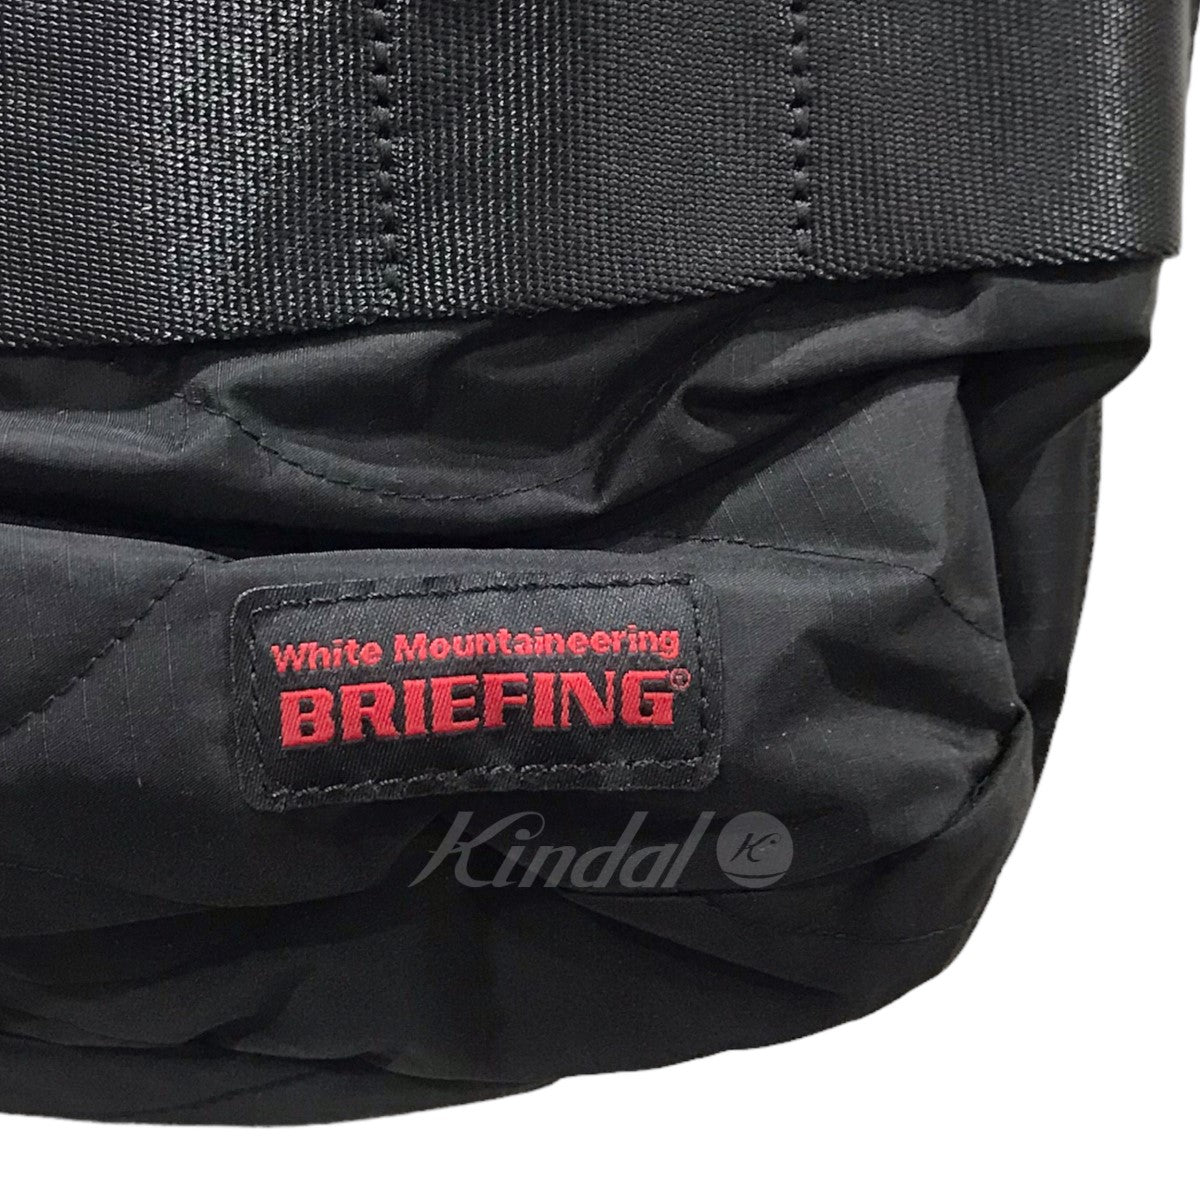 White Mountaineering×BRIEFING ブリーフィング - ビジネスバッグ